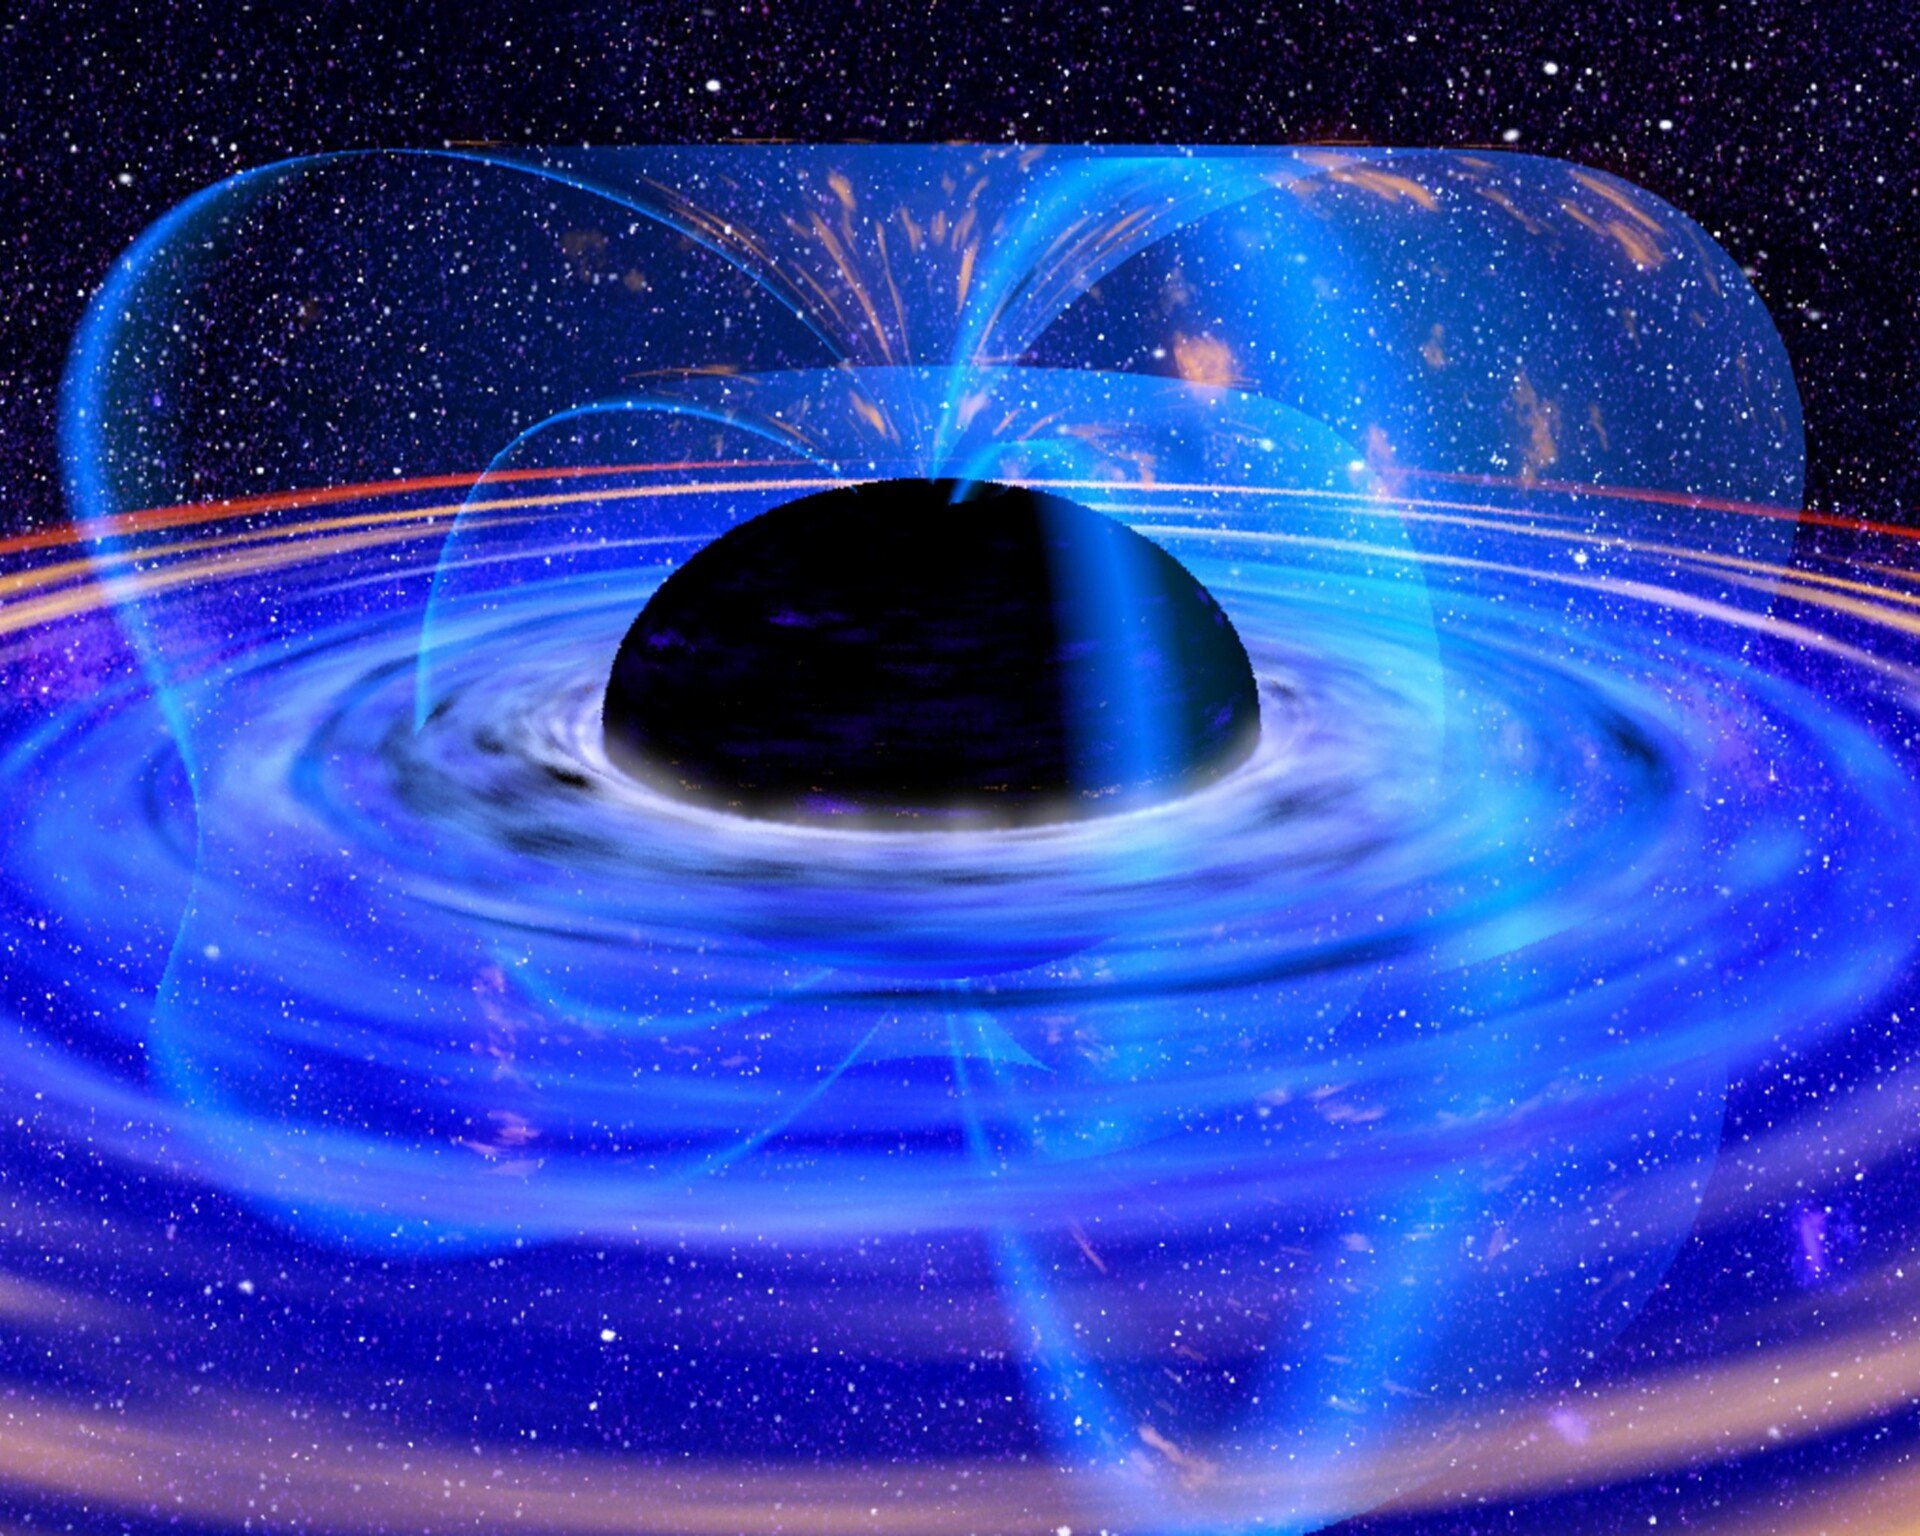 A black hole a billion times larger than the Sun has been found